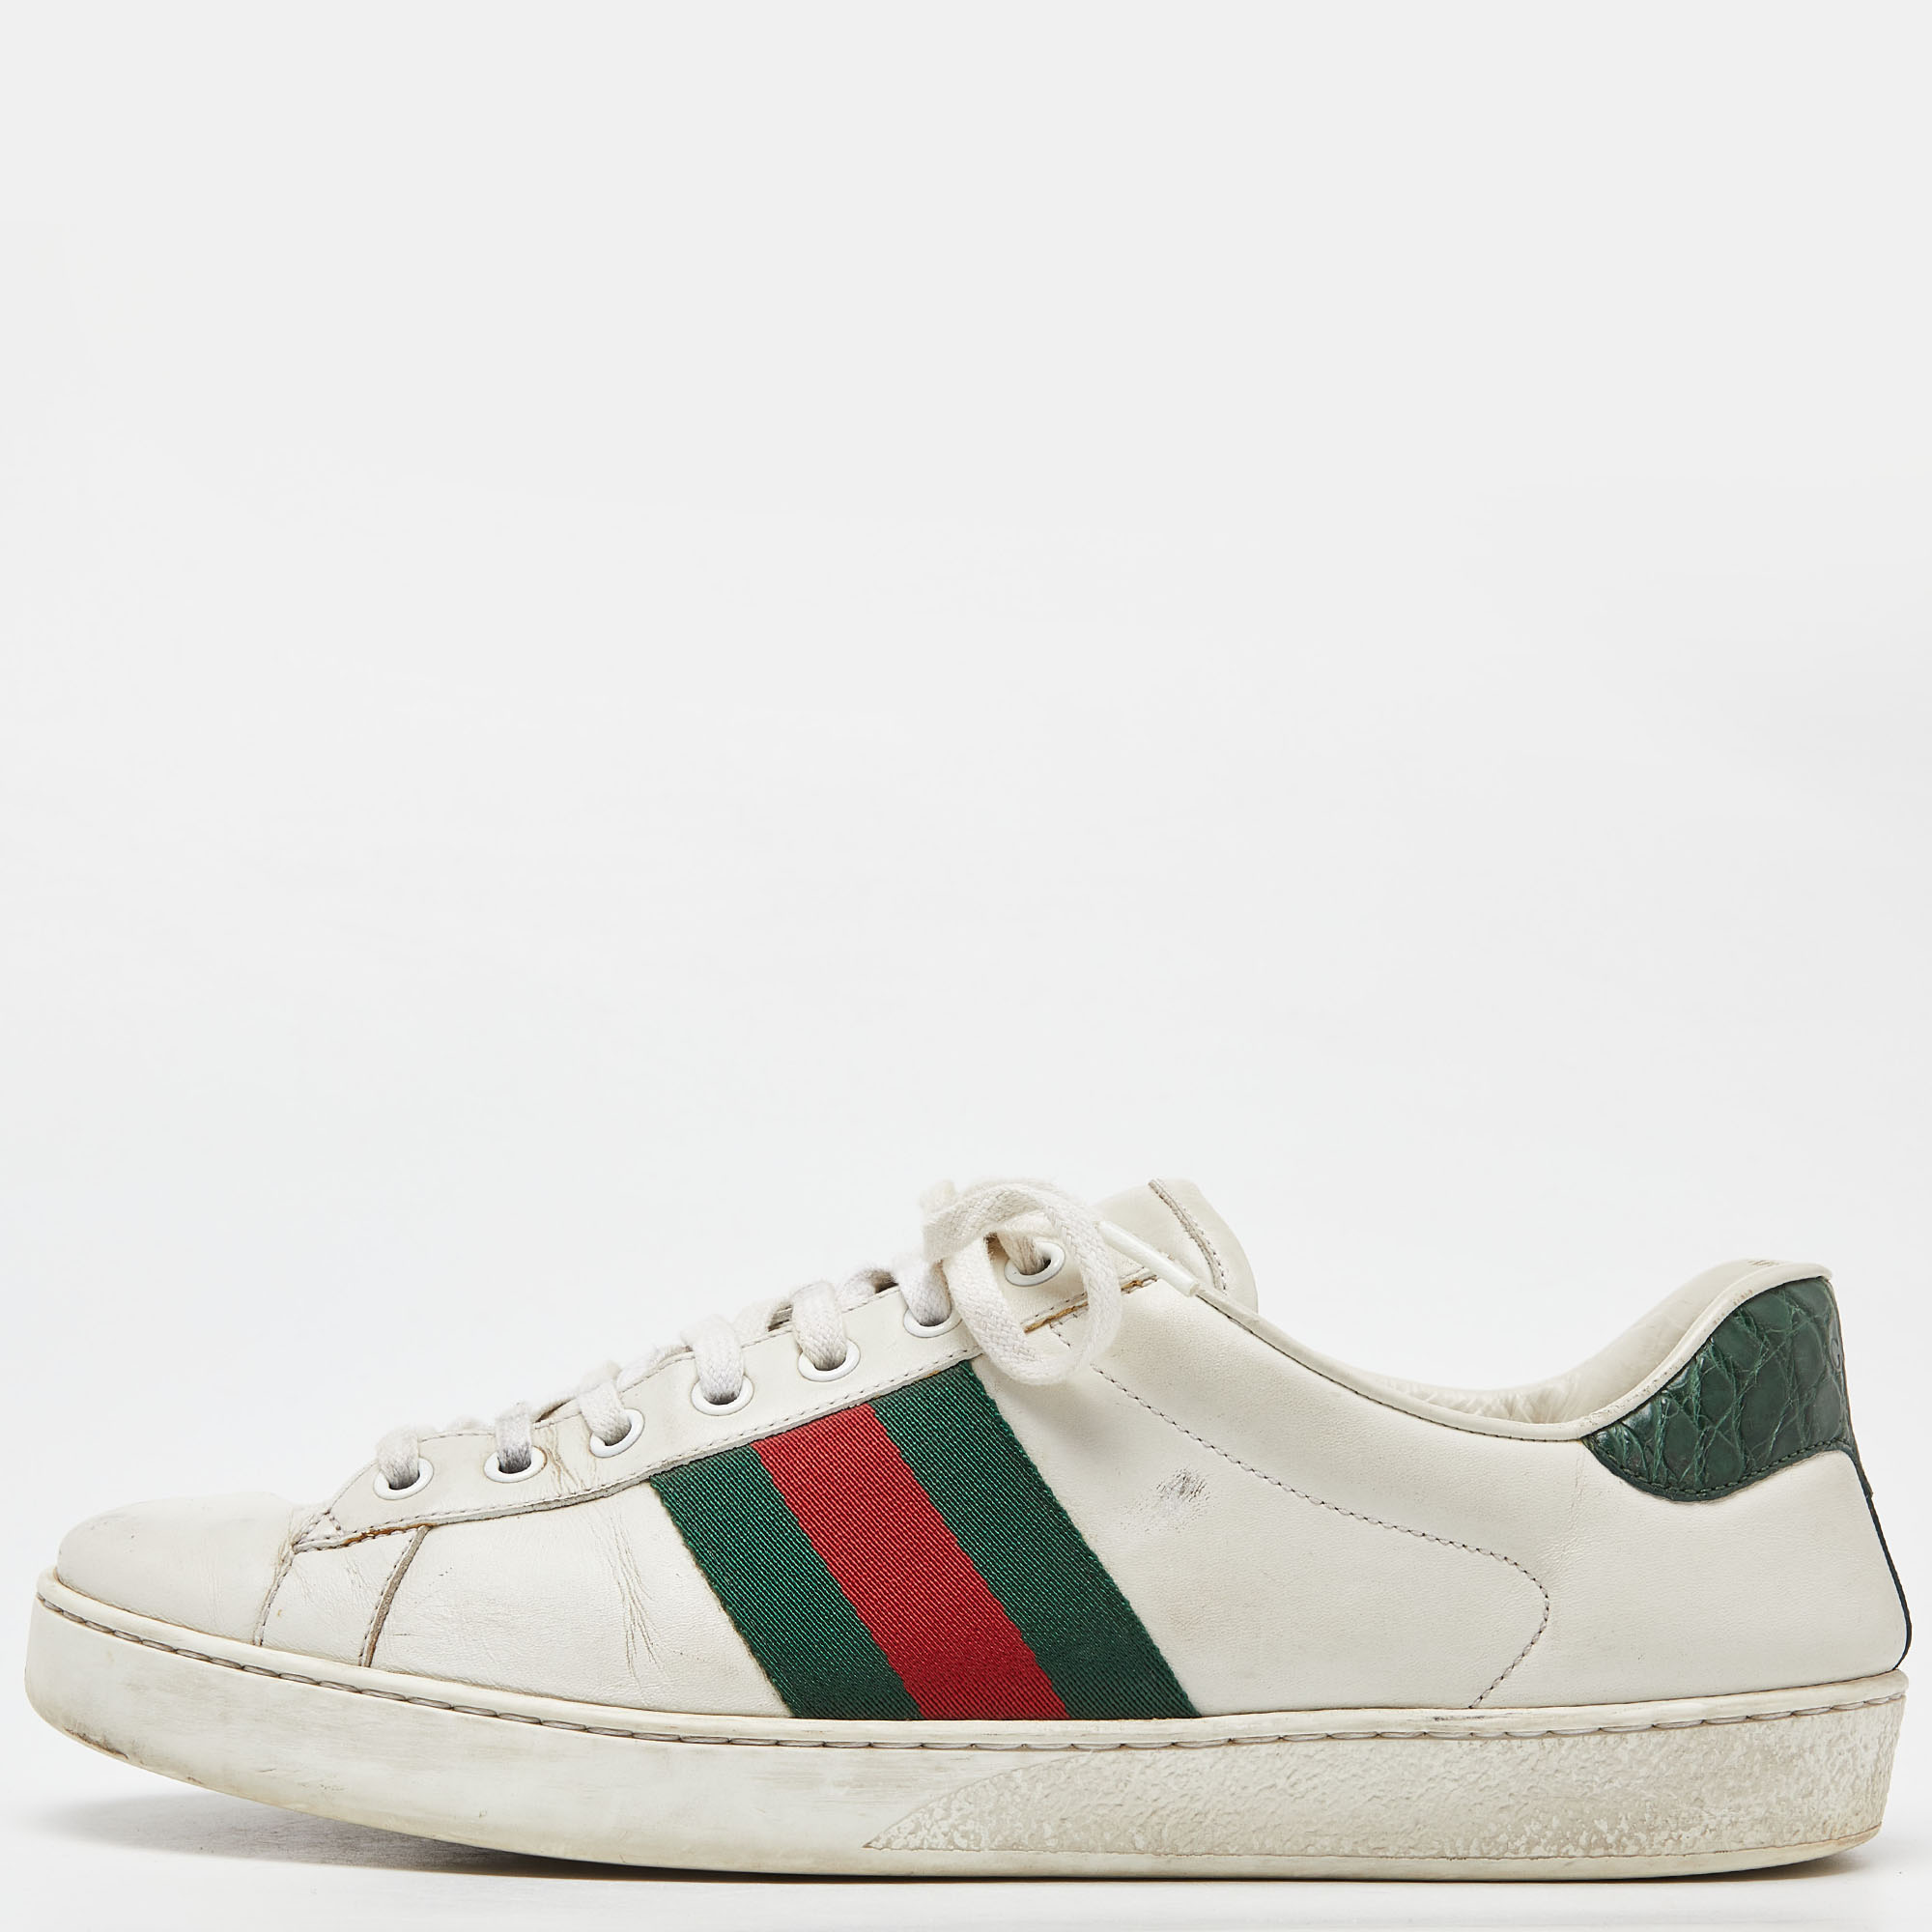 Gucci white leather web detail ace low top sneakers size 43